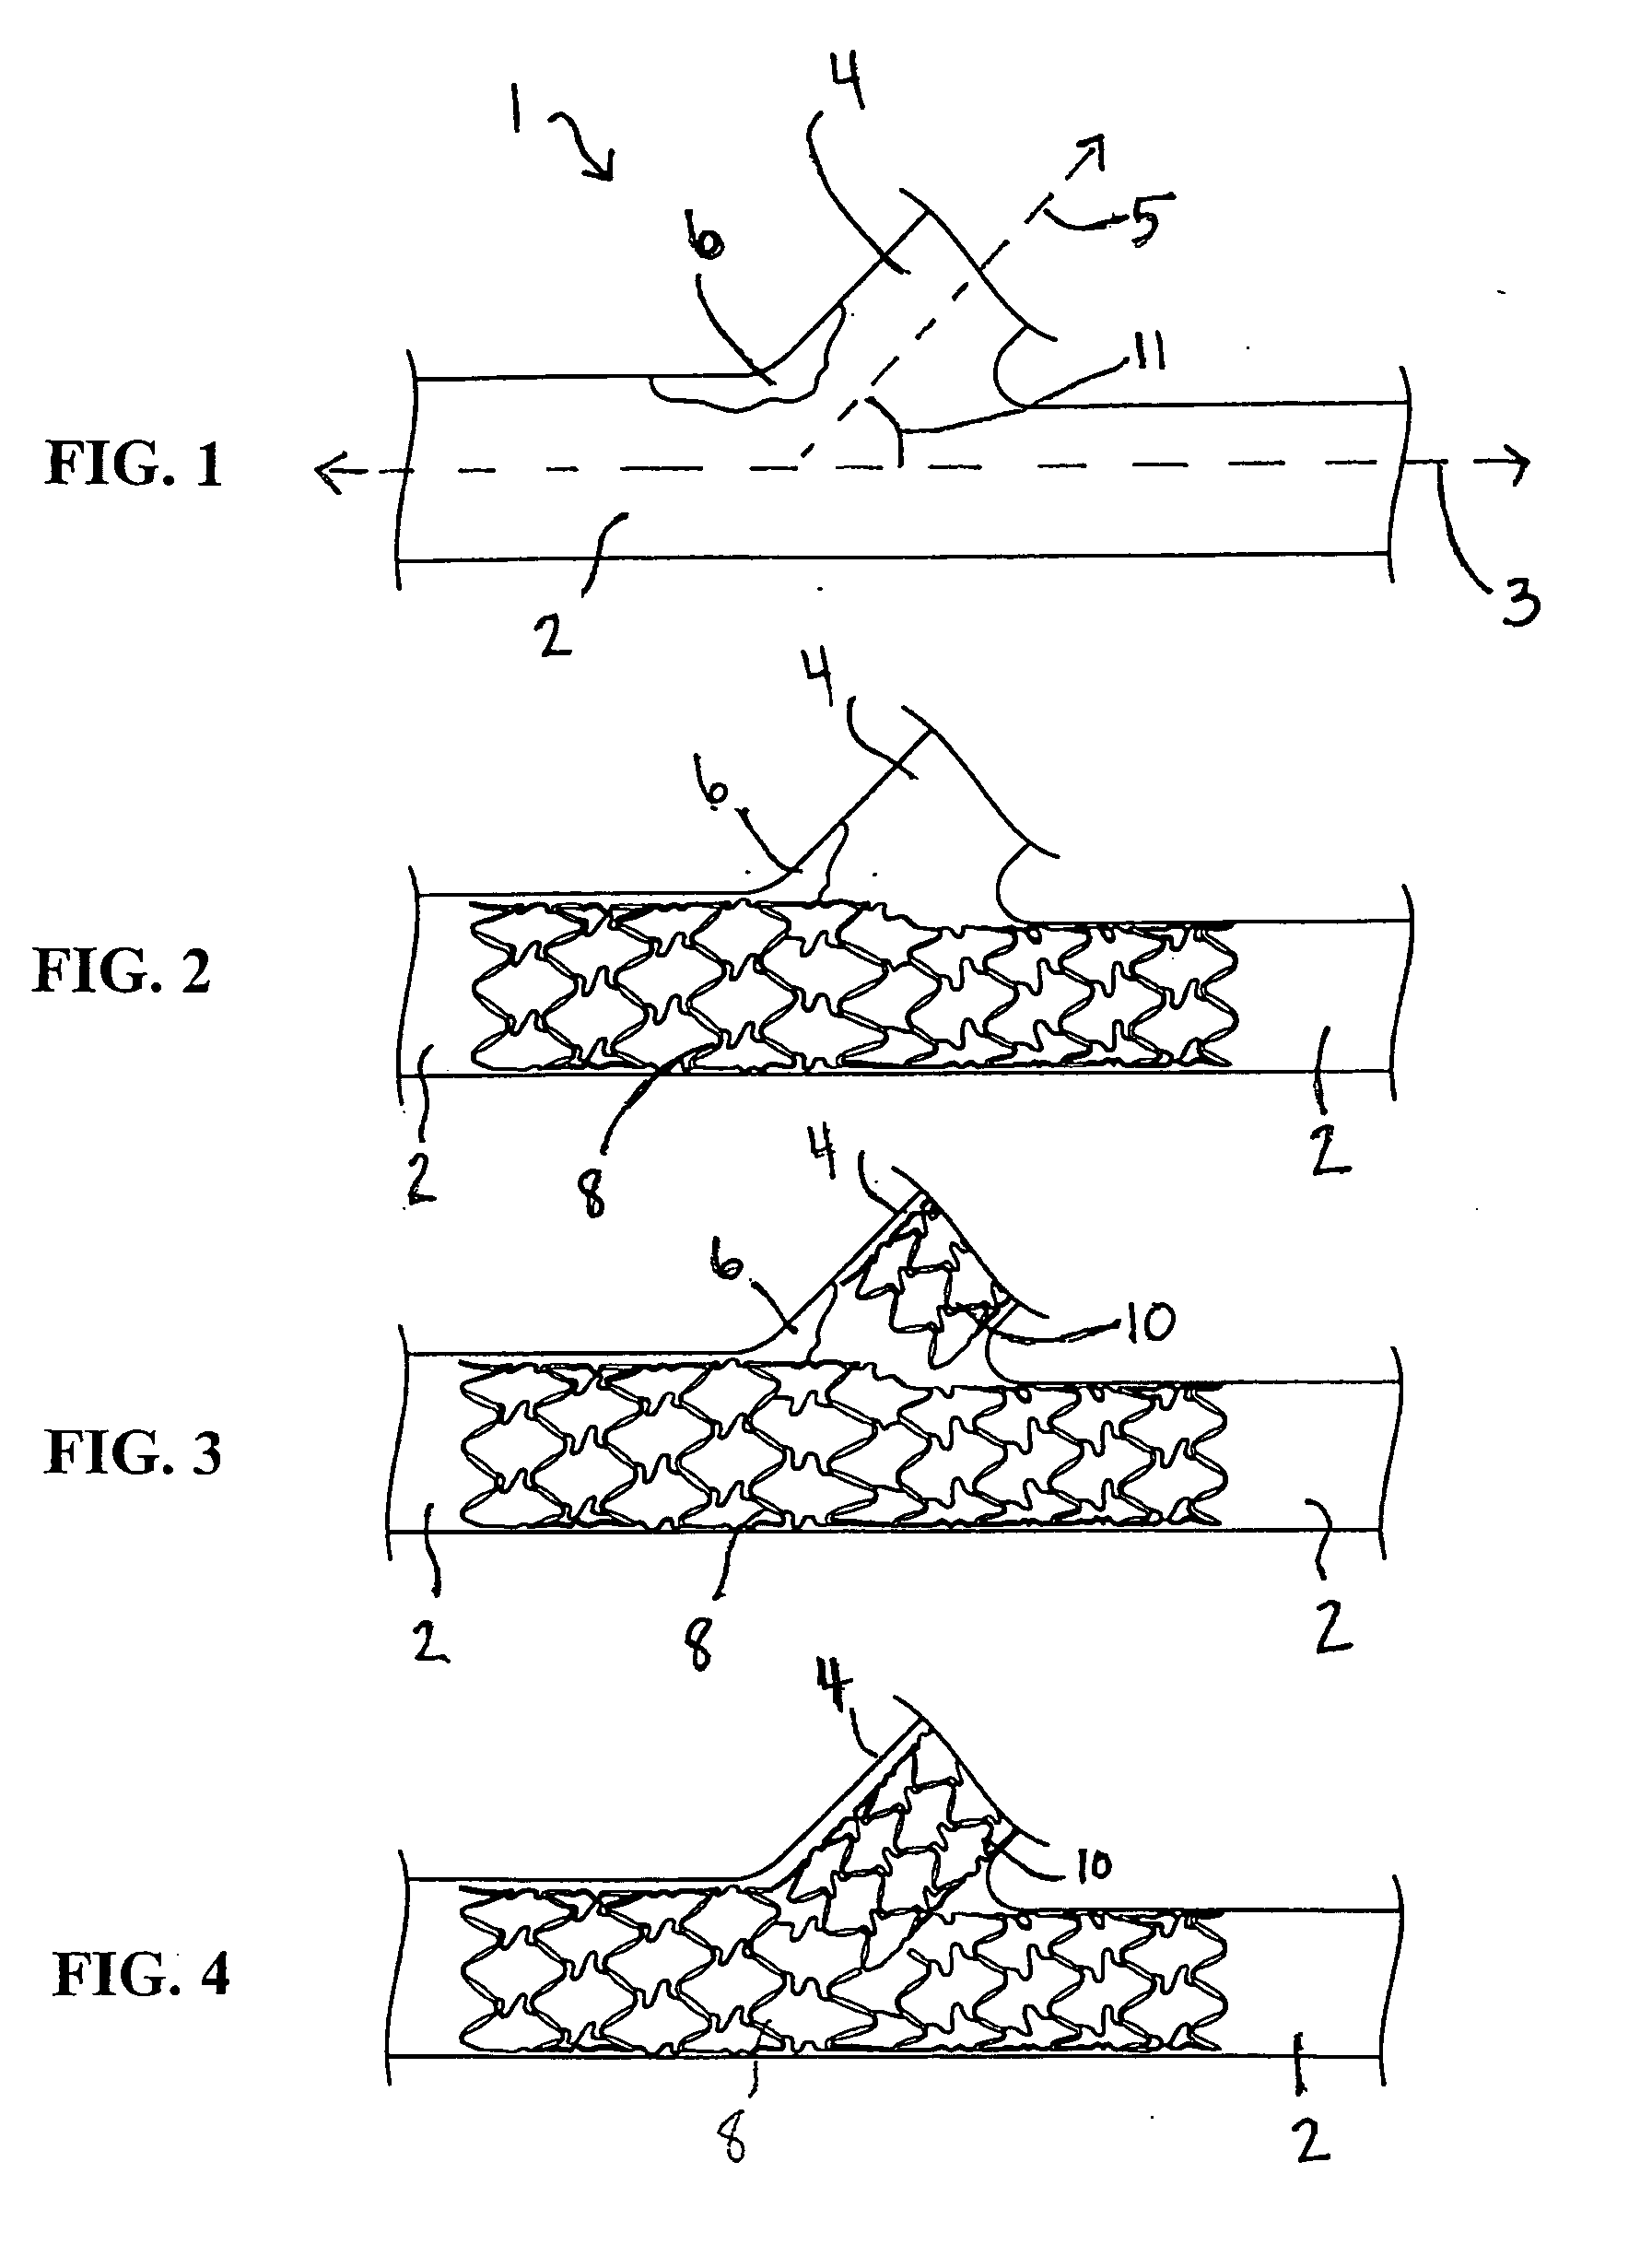 Stent with protruding branch portion for bifurcated vessels